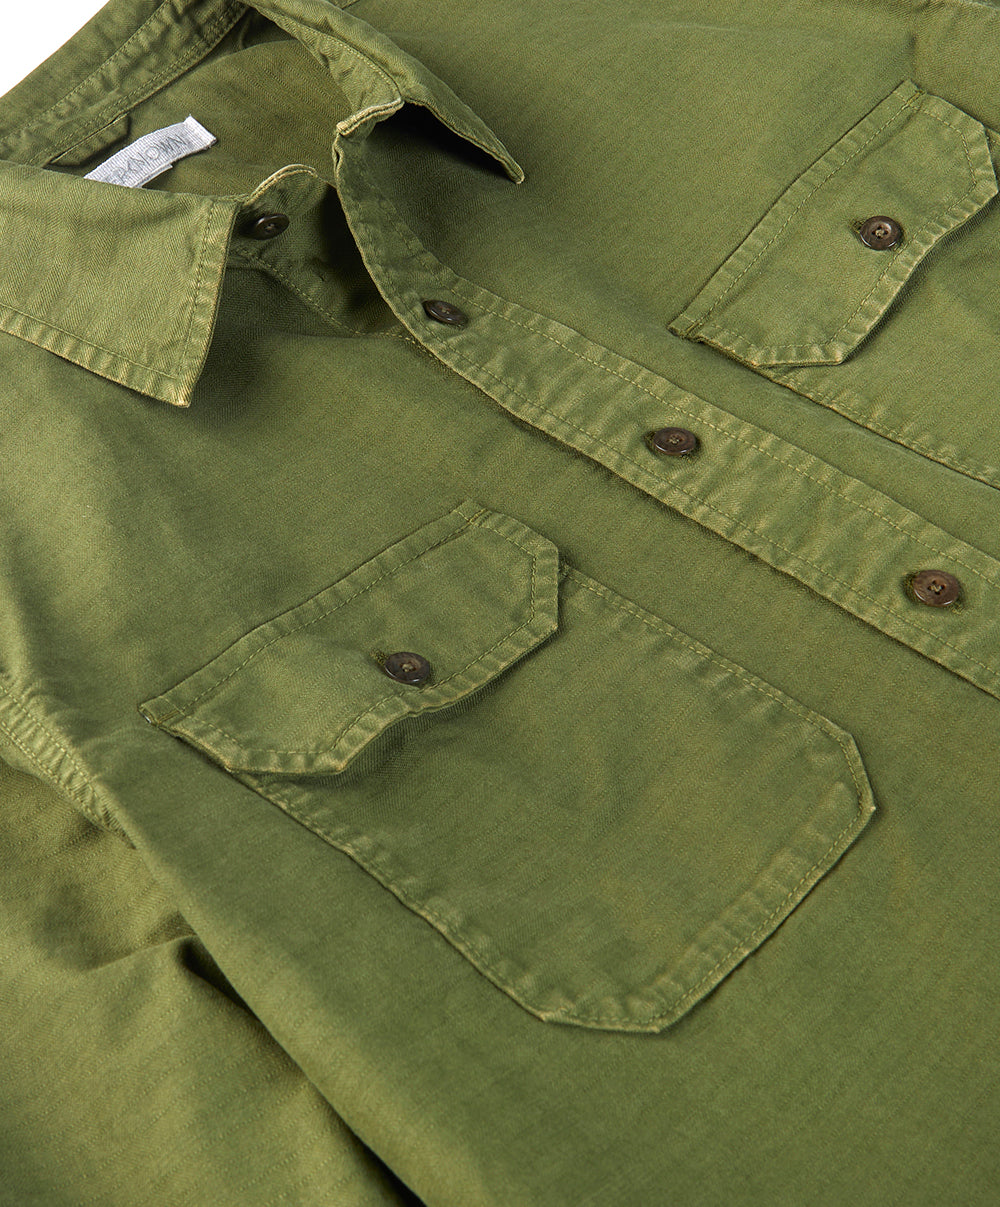 OUTERKNOWN THE UTILITARIAN SHIRT IN OLIVE DRAB